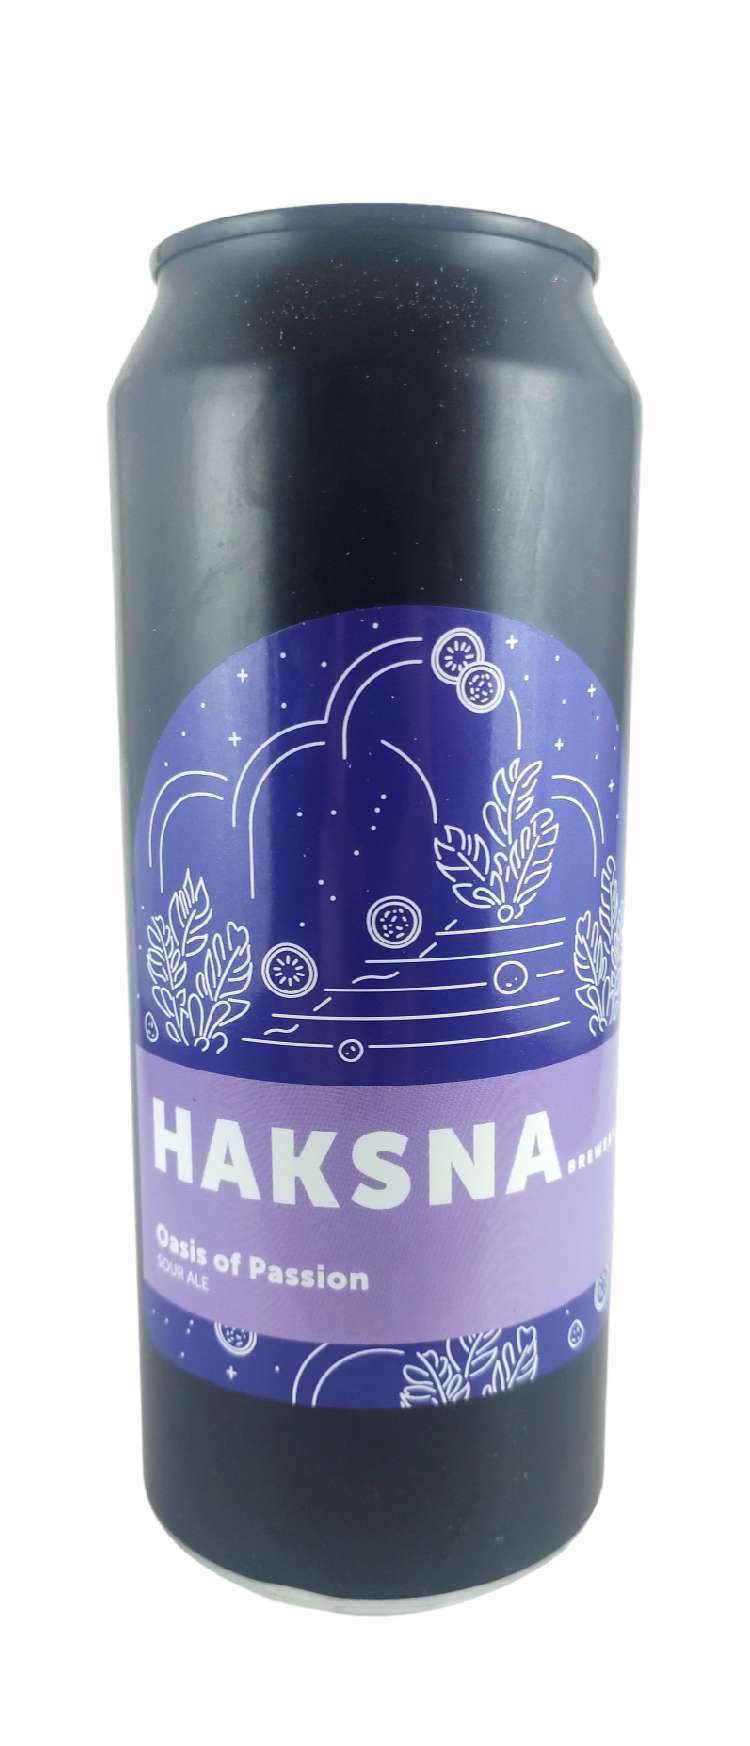 Haksna Oasis of Passion Sour Ale 11°